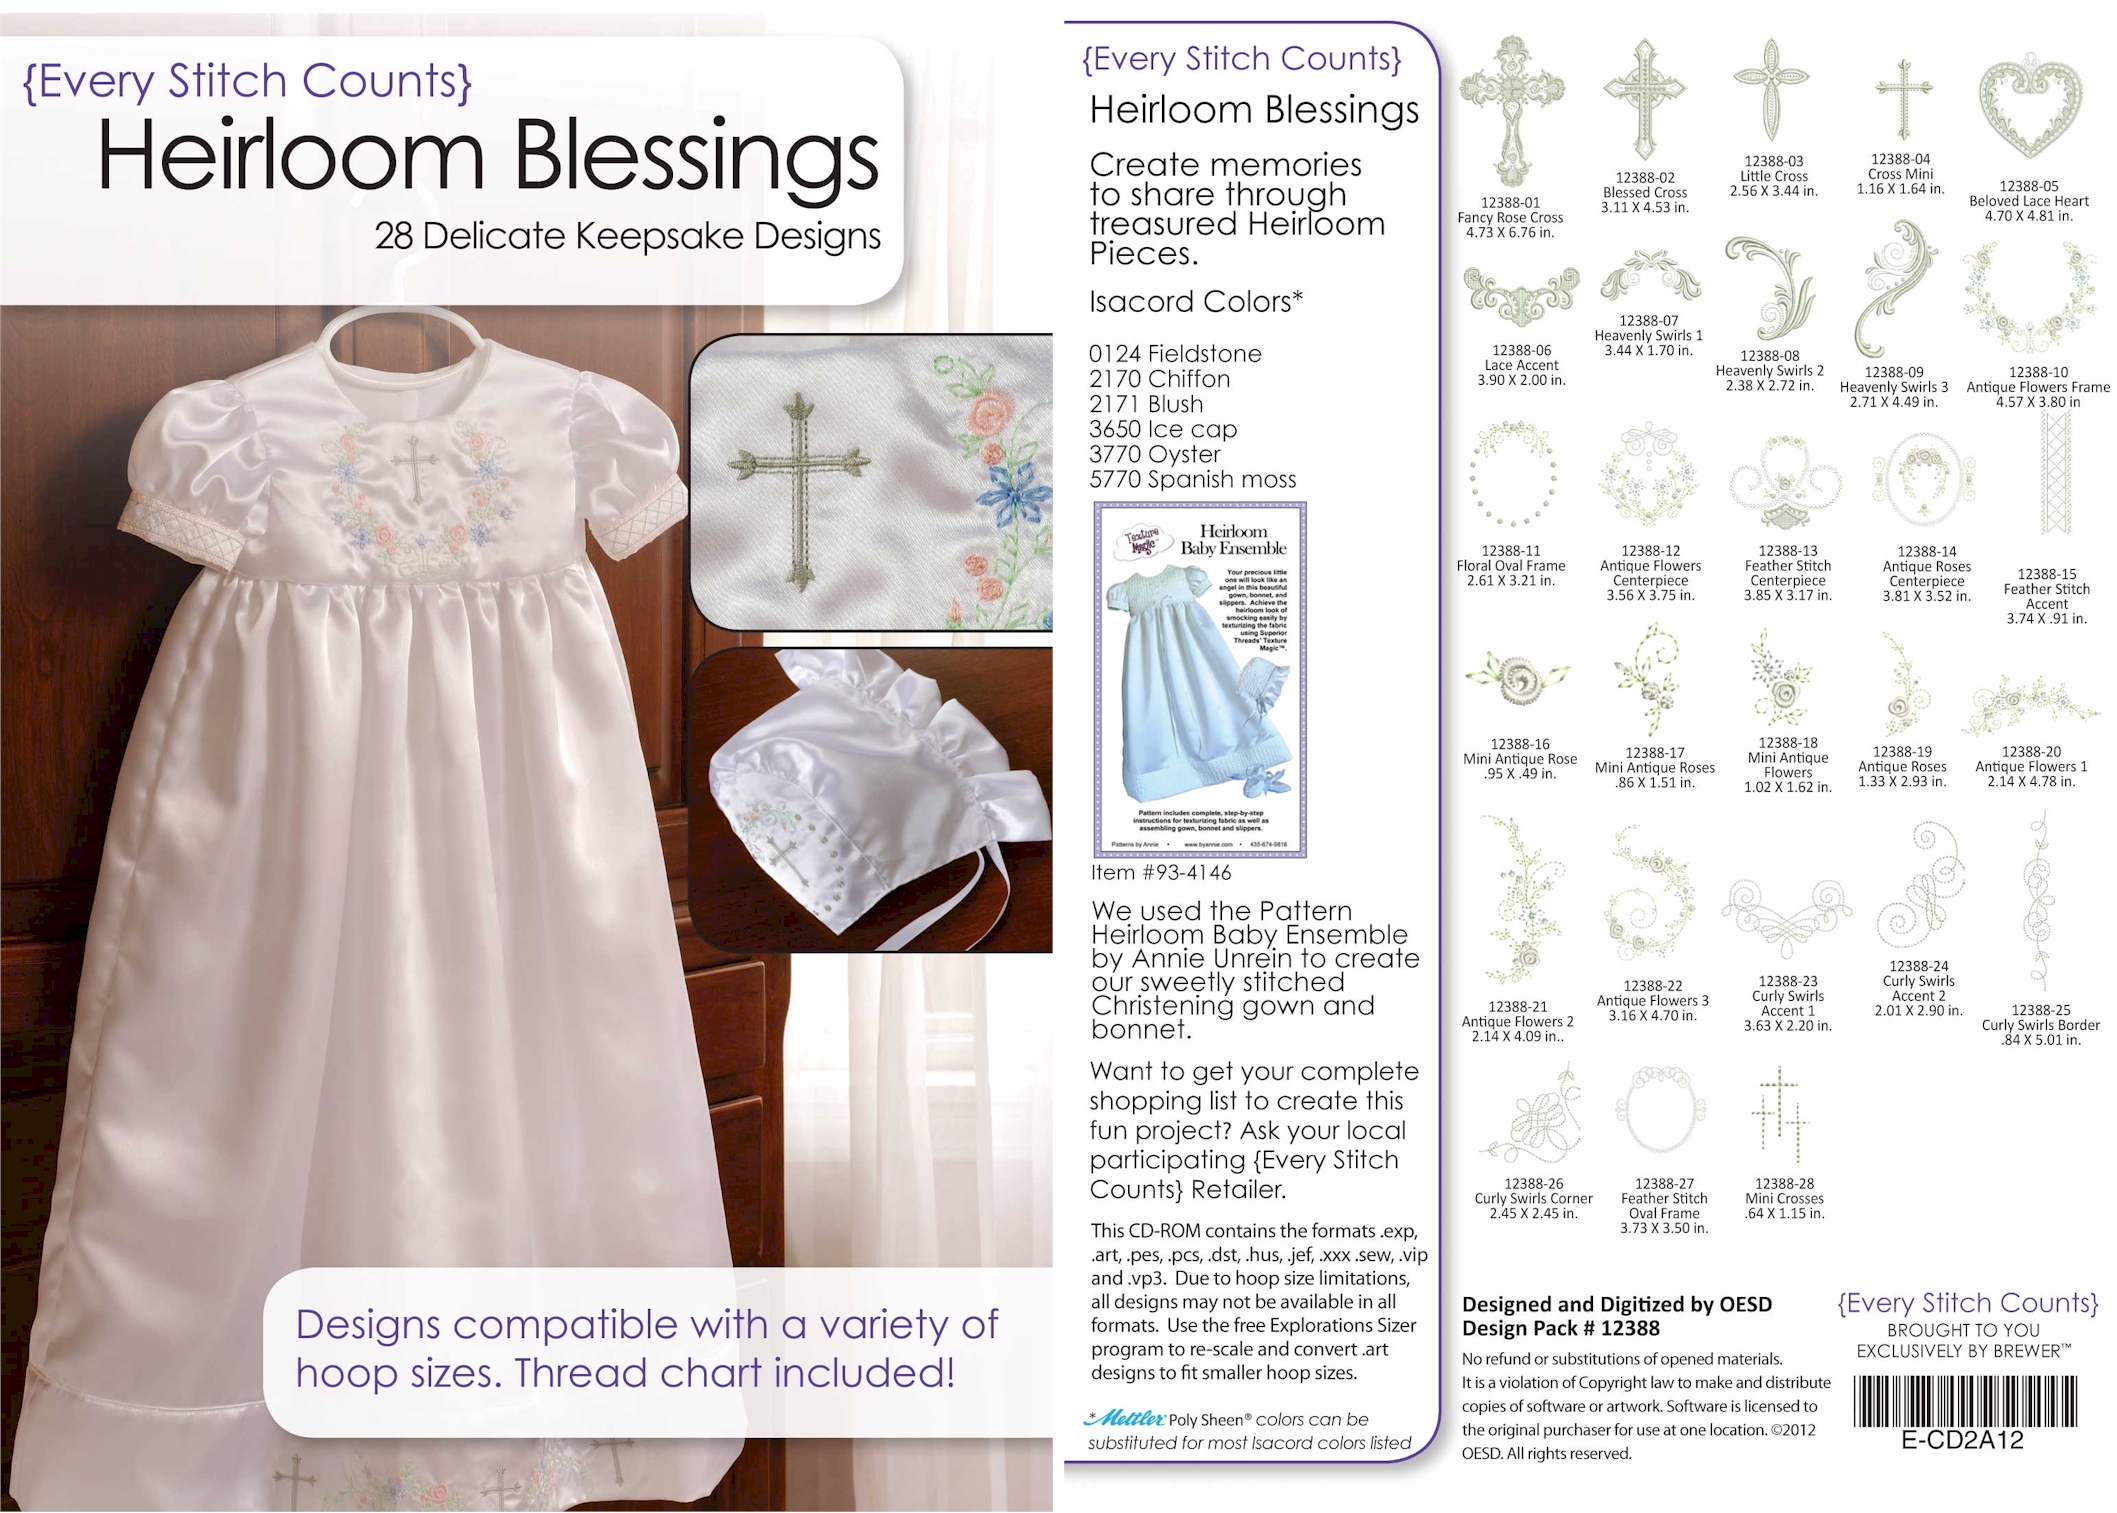 Heirloom Blessings Embroidery Designs on CD-ROM by Every Stitch Counts